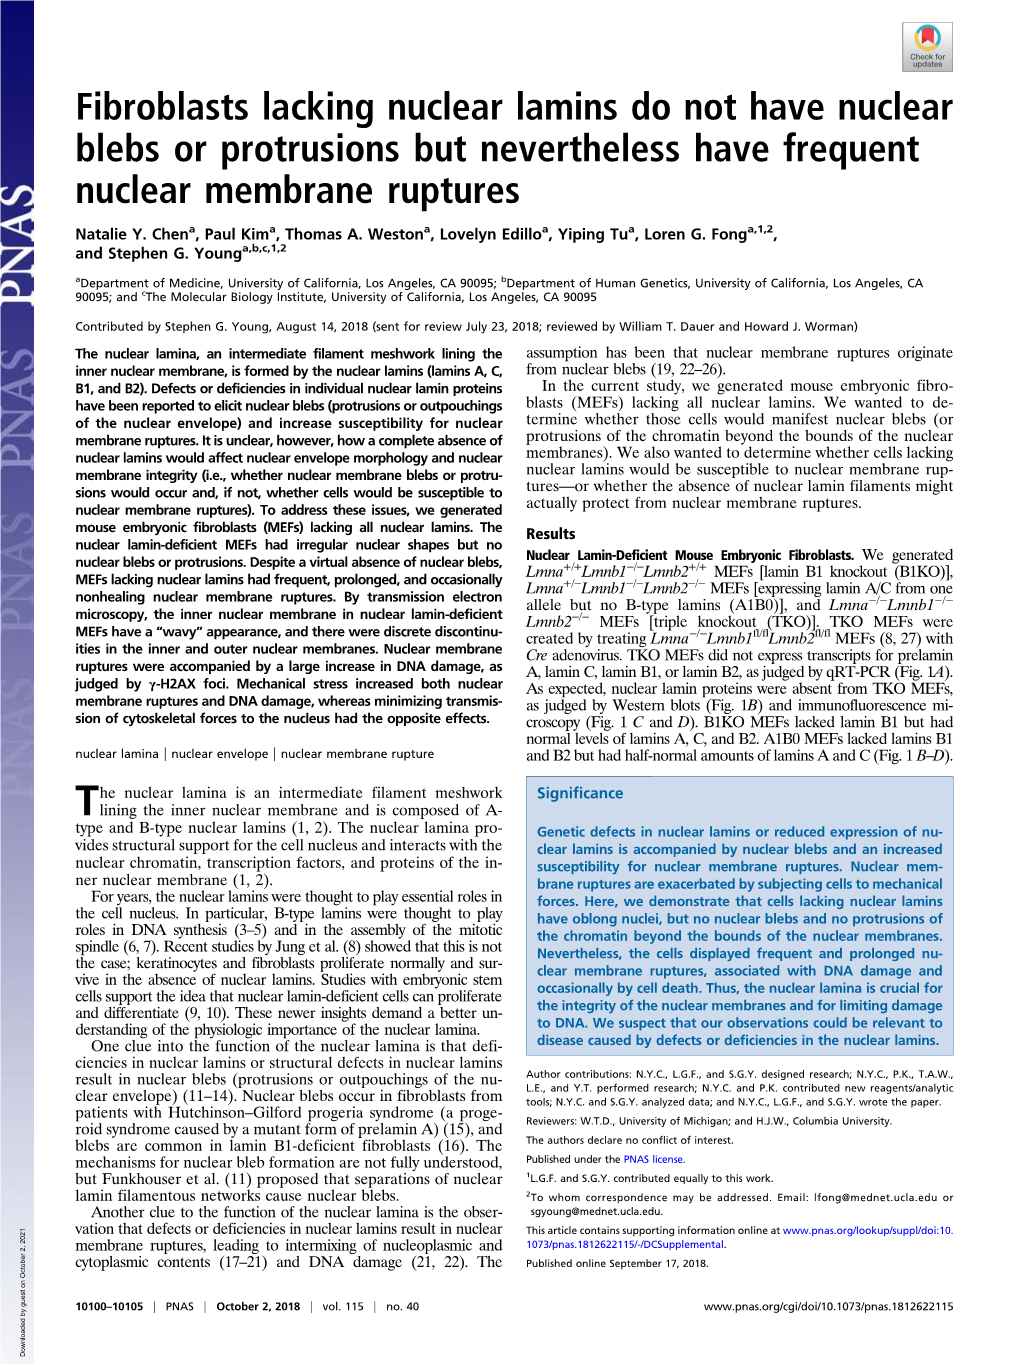 Fibroblasts Lacking Nuclear Lamins Do Not Have Nuclear Blebs Or Protrusions but Nevertheless Have Frequent Nuclear Membrane Ruptures